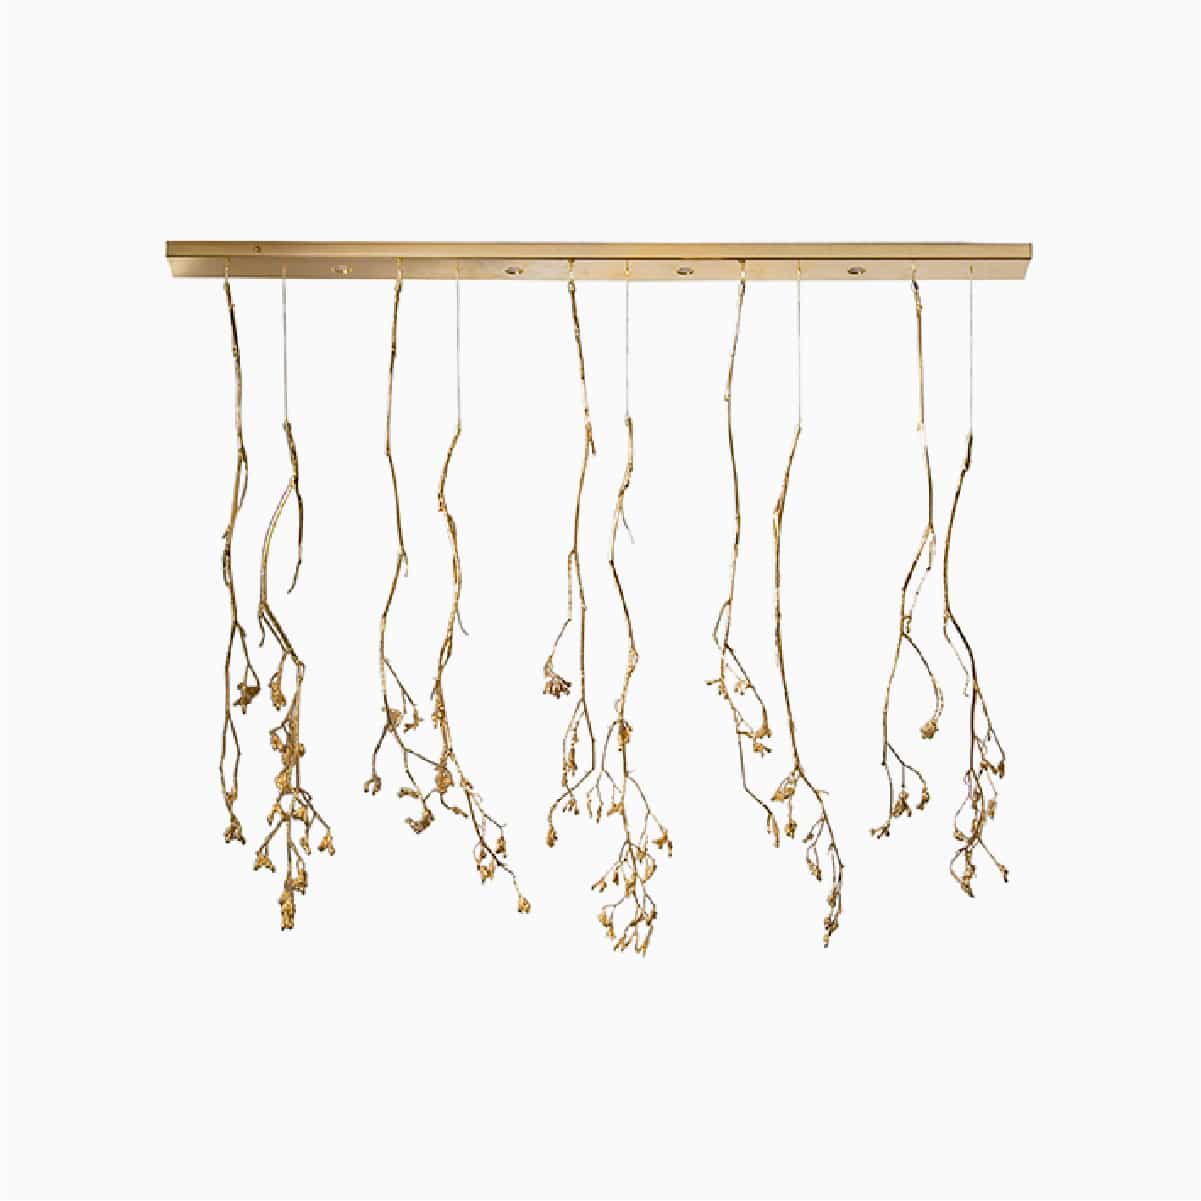 product page square_Kangaroo Paw Chandelier